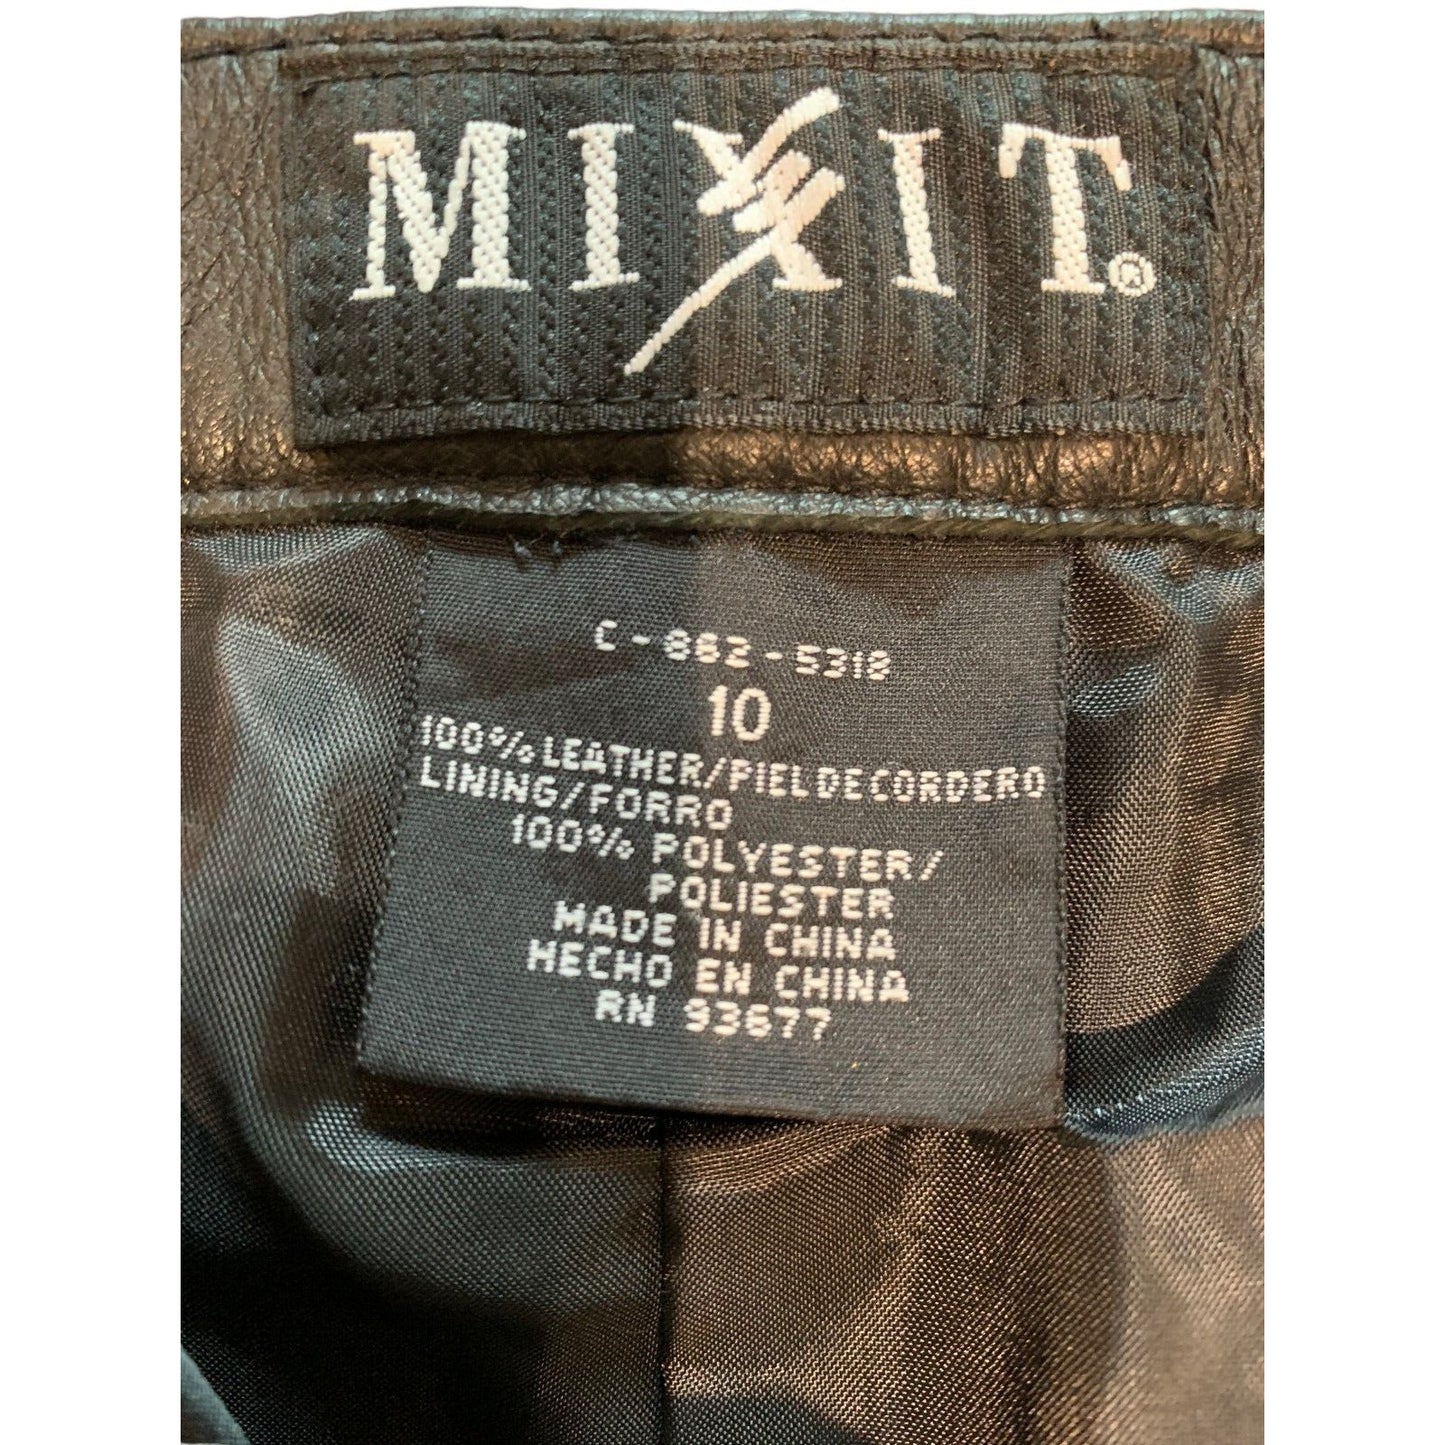 Brand Label And Fabric Info